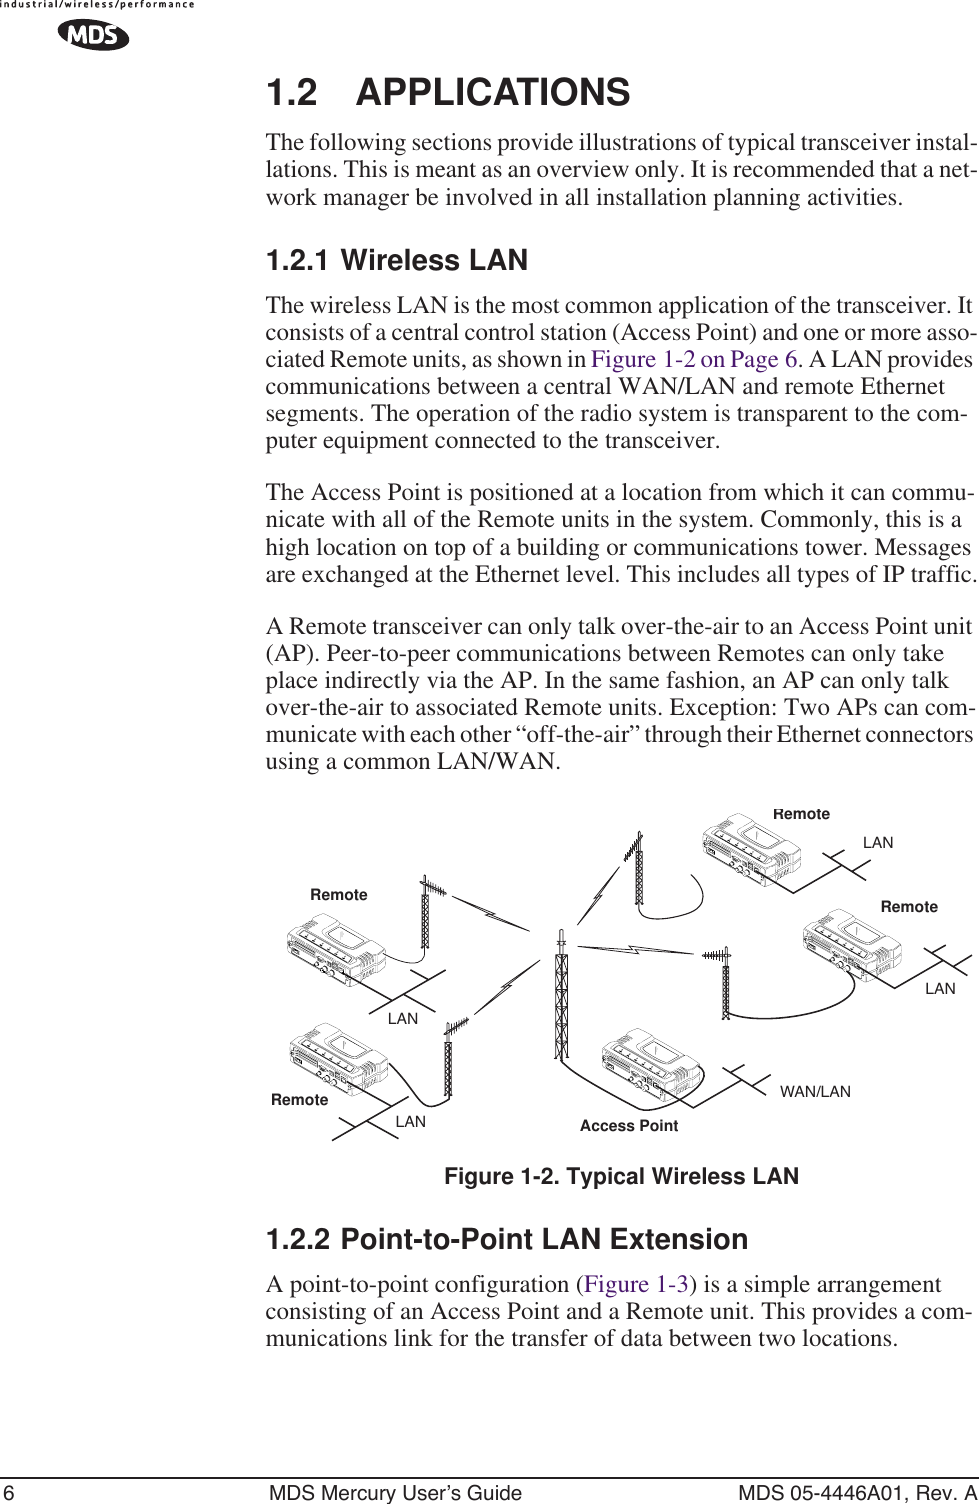 6 MDS Mercury User’s Guide MDS 05-4446A01, Rev. A1.2 APPLICATIONSThe following sections provide illustrations of typical transceiver instal-lations. This is meant as an overview only. It is recommended that a net-work manager be involved in all installation planning activities.1.2.1 Wireless LANThe wireless LAN is the most common application of the transceiver. It consists of a central control station (Access Point) and one or more asso-ciated Remote units, as shown in Figure 1-2 on Page 6. A LAN provides communications between a central WAN/LAN and remote Ethernet segments. The operation of the radio system is transparent to the com-puter equipment connected to the transceiver.The Access Point is positioned at a location from which it can commu-nicate with all of the Remote units in the system. Commonly, this is a high location on top of a building or communications tower. Messages are exchanged at the Ethernet level. This includes all types of IP traffic.A Remote transceiver can only talk over-the-air to an Access Point unit (AP). Peer-to-peer communications between Remotes can only take place indirectly via the AP. In the same fashion, an AP can only talk over-the-air to associated Remote units. Exception: Two APs can com-municate with each other “off-the-air” through their Ethernet connectors using a common LAN/WAN.Invisible place holderFigure 1-2. Typical Wireless LAN1.2.2 Point-to-Point LAN ExtensionA point-to-point configuration (Figure 1-3) is a simple arrangement consisting of an Access Point and a Remote unit. This provides a com-munications link for the transfer of data between two locations.RemoteRemoteAccess PointRemoteRemoteLANLANWAN/LANLANLAN